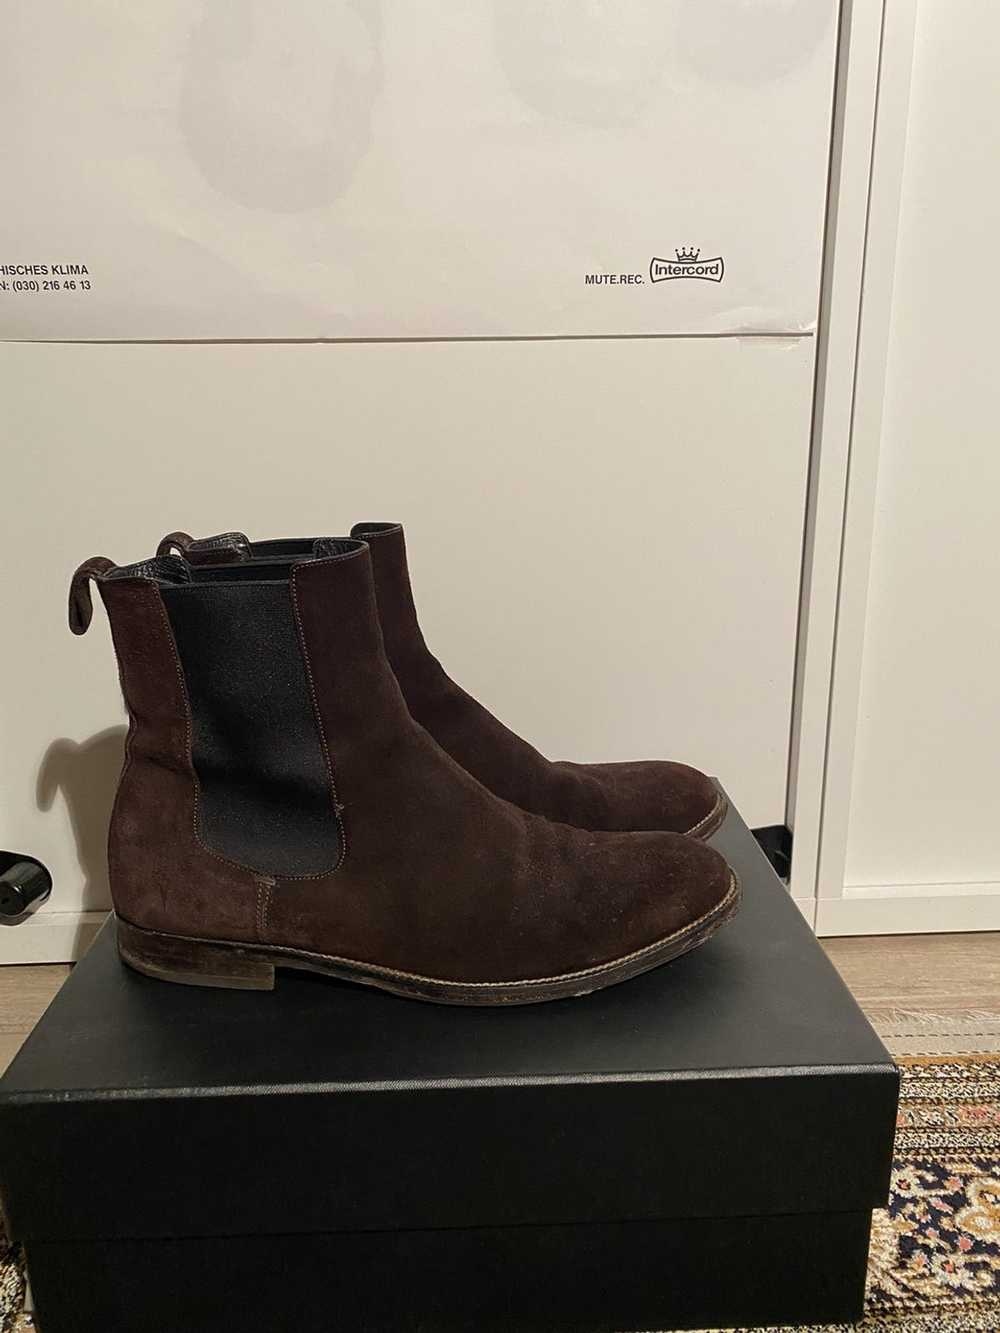 Gucci Brown Tan Chelsea Suede Boots - image 1